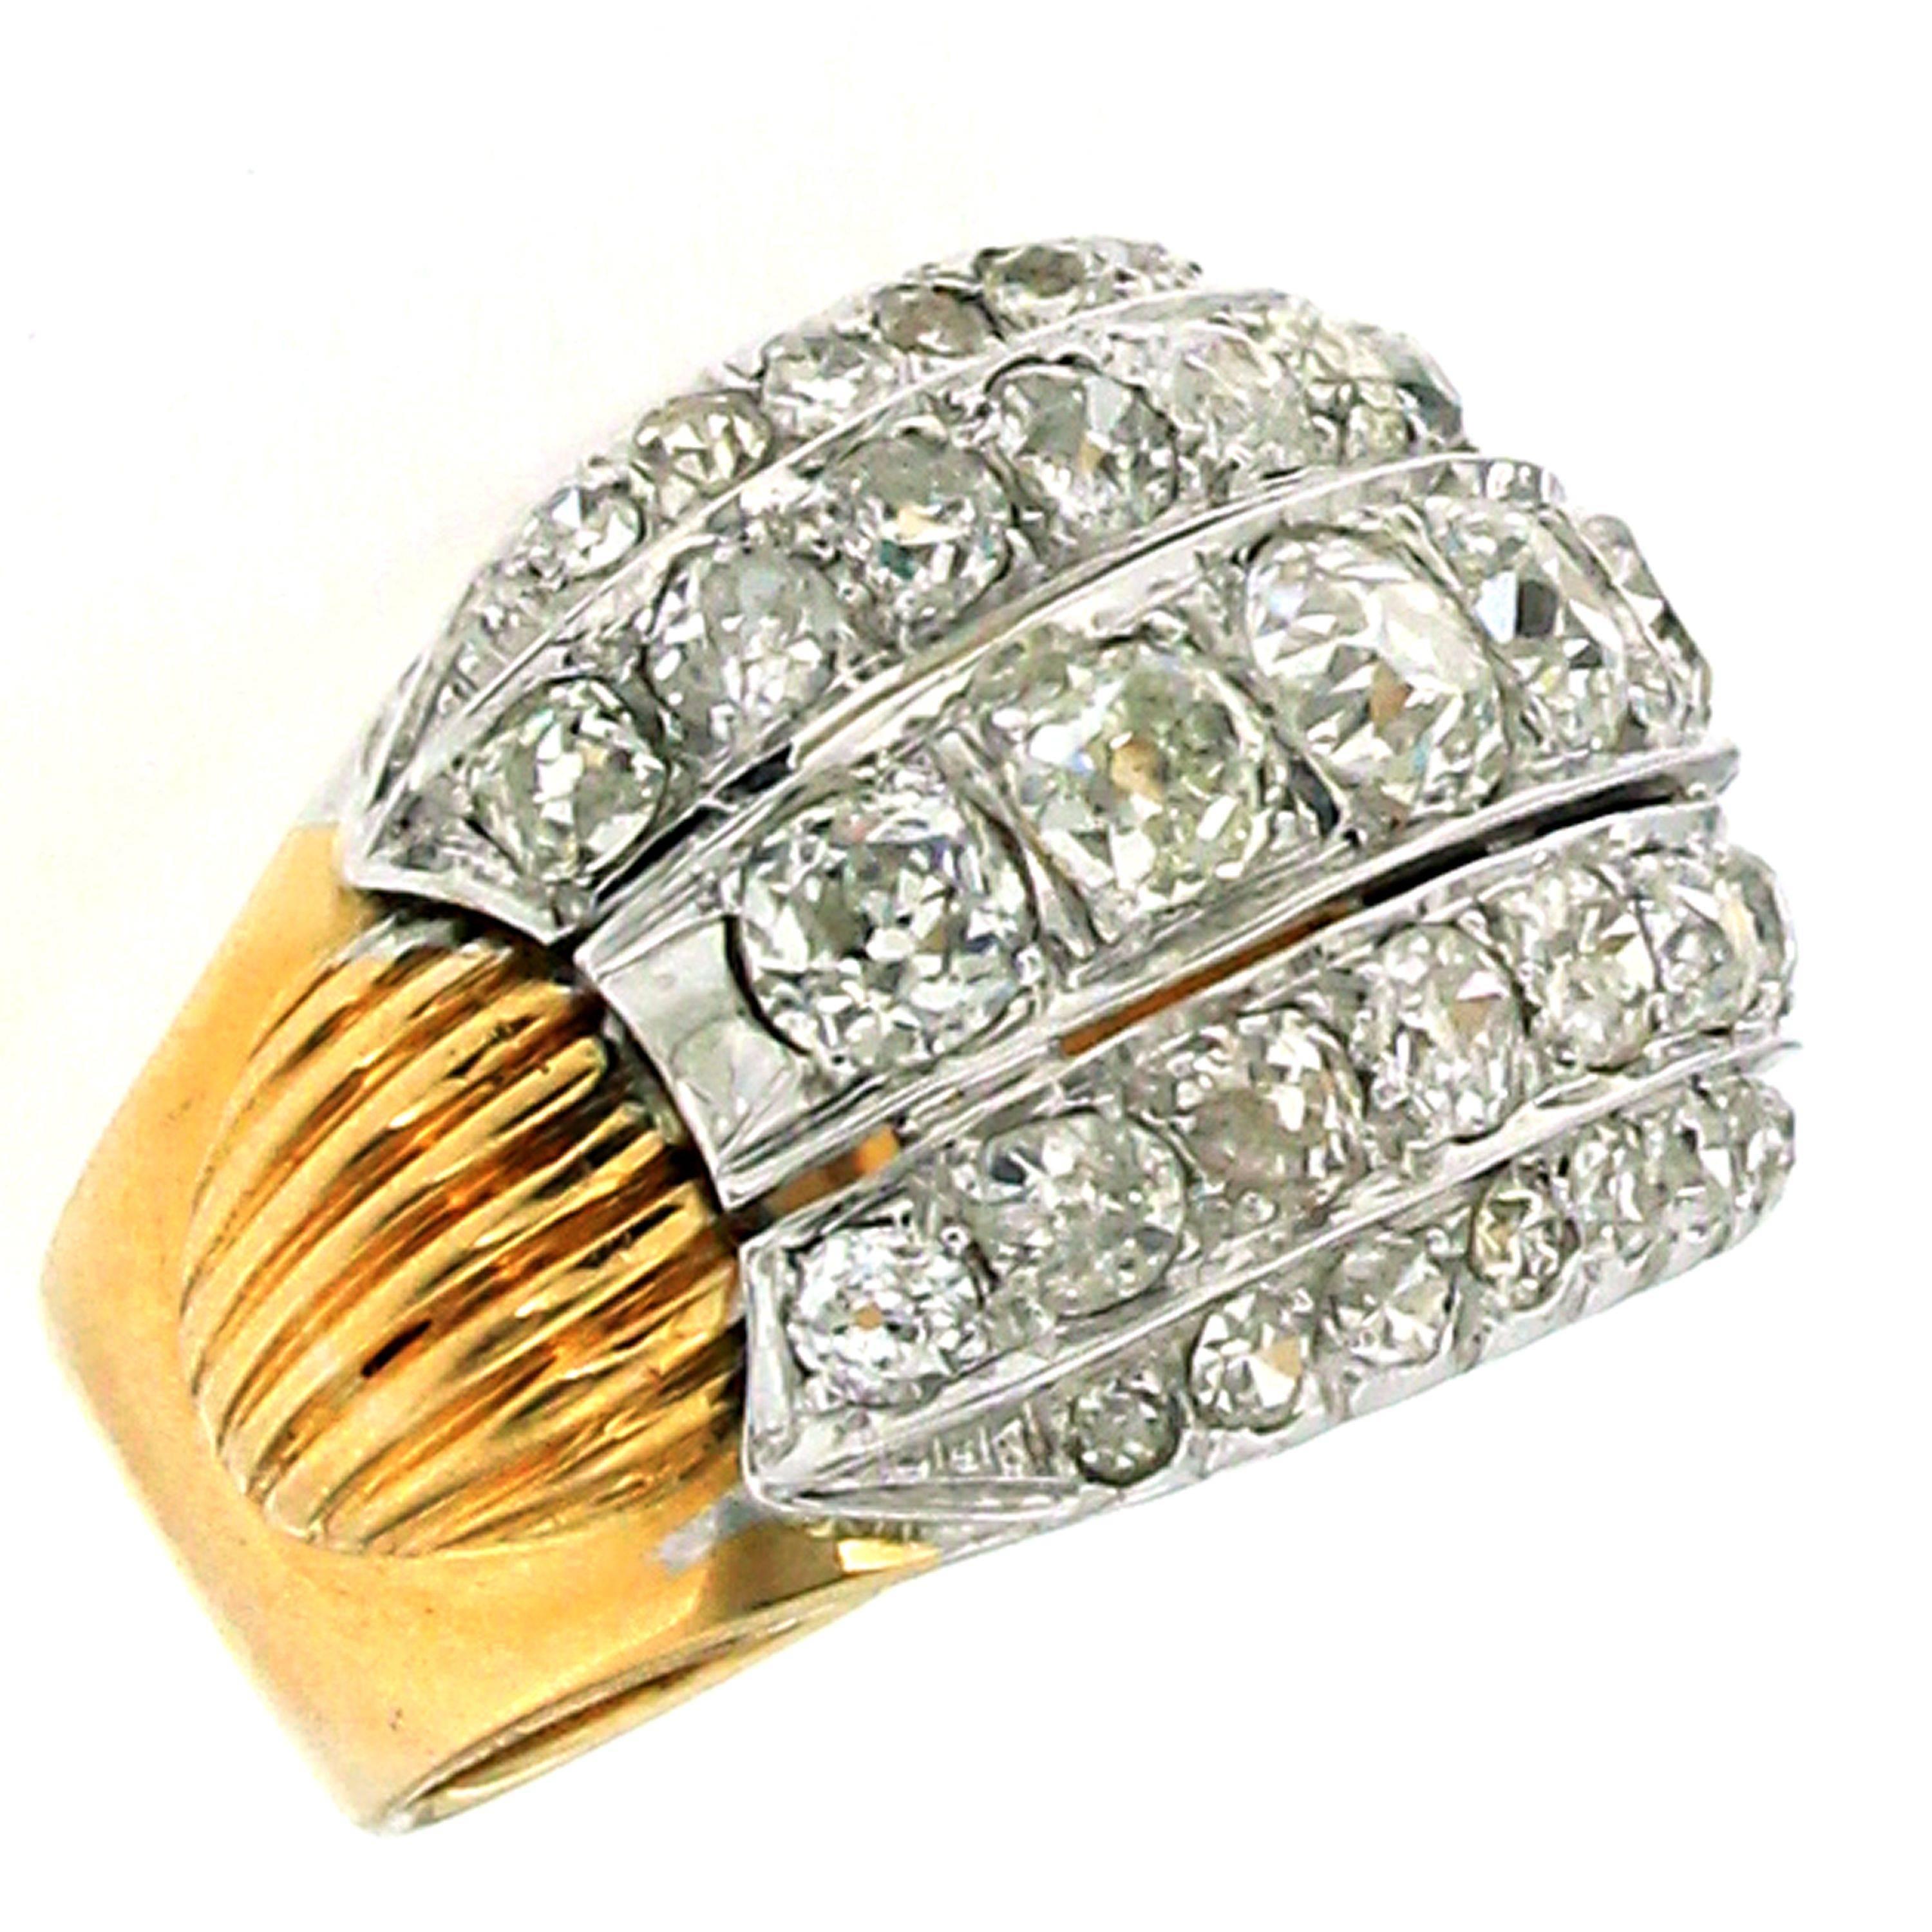 An Authentic Retro ring, original from 1940, made in Italy, mounted in 18k yellow and white gold.

The ring has a wide, textured band comprised of ridged grooves that travel around the entire outer surface, in the center there are five horizontal